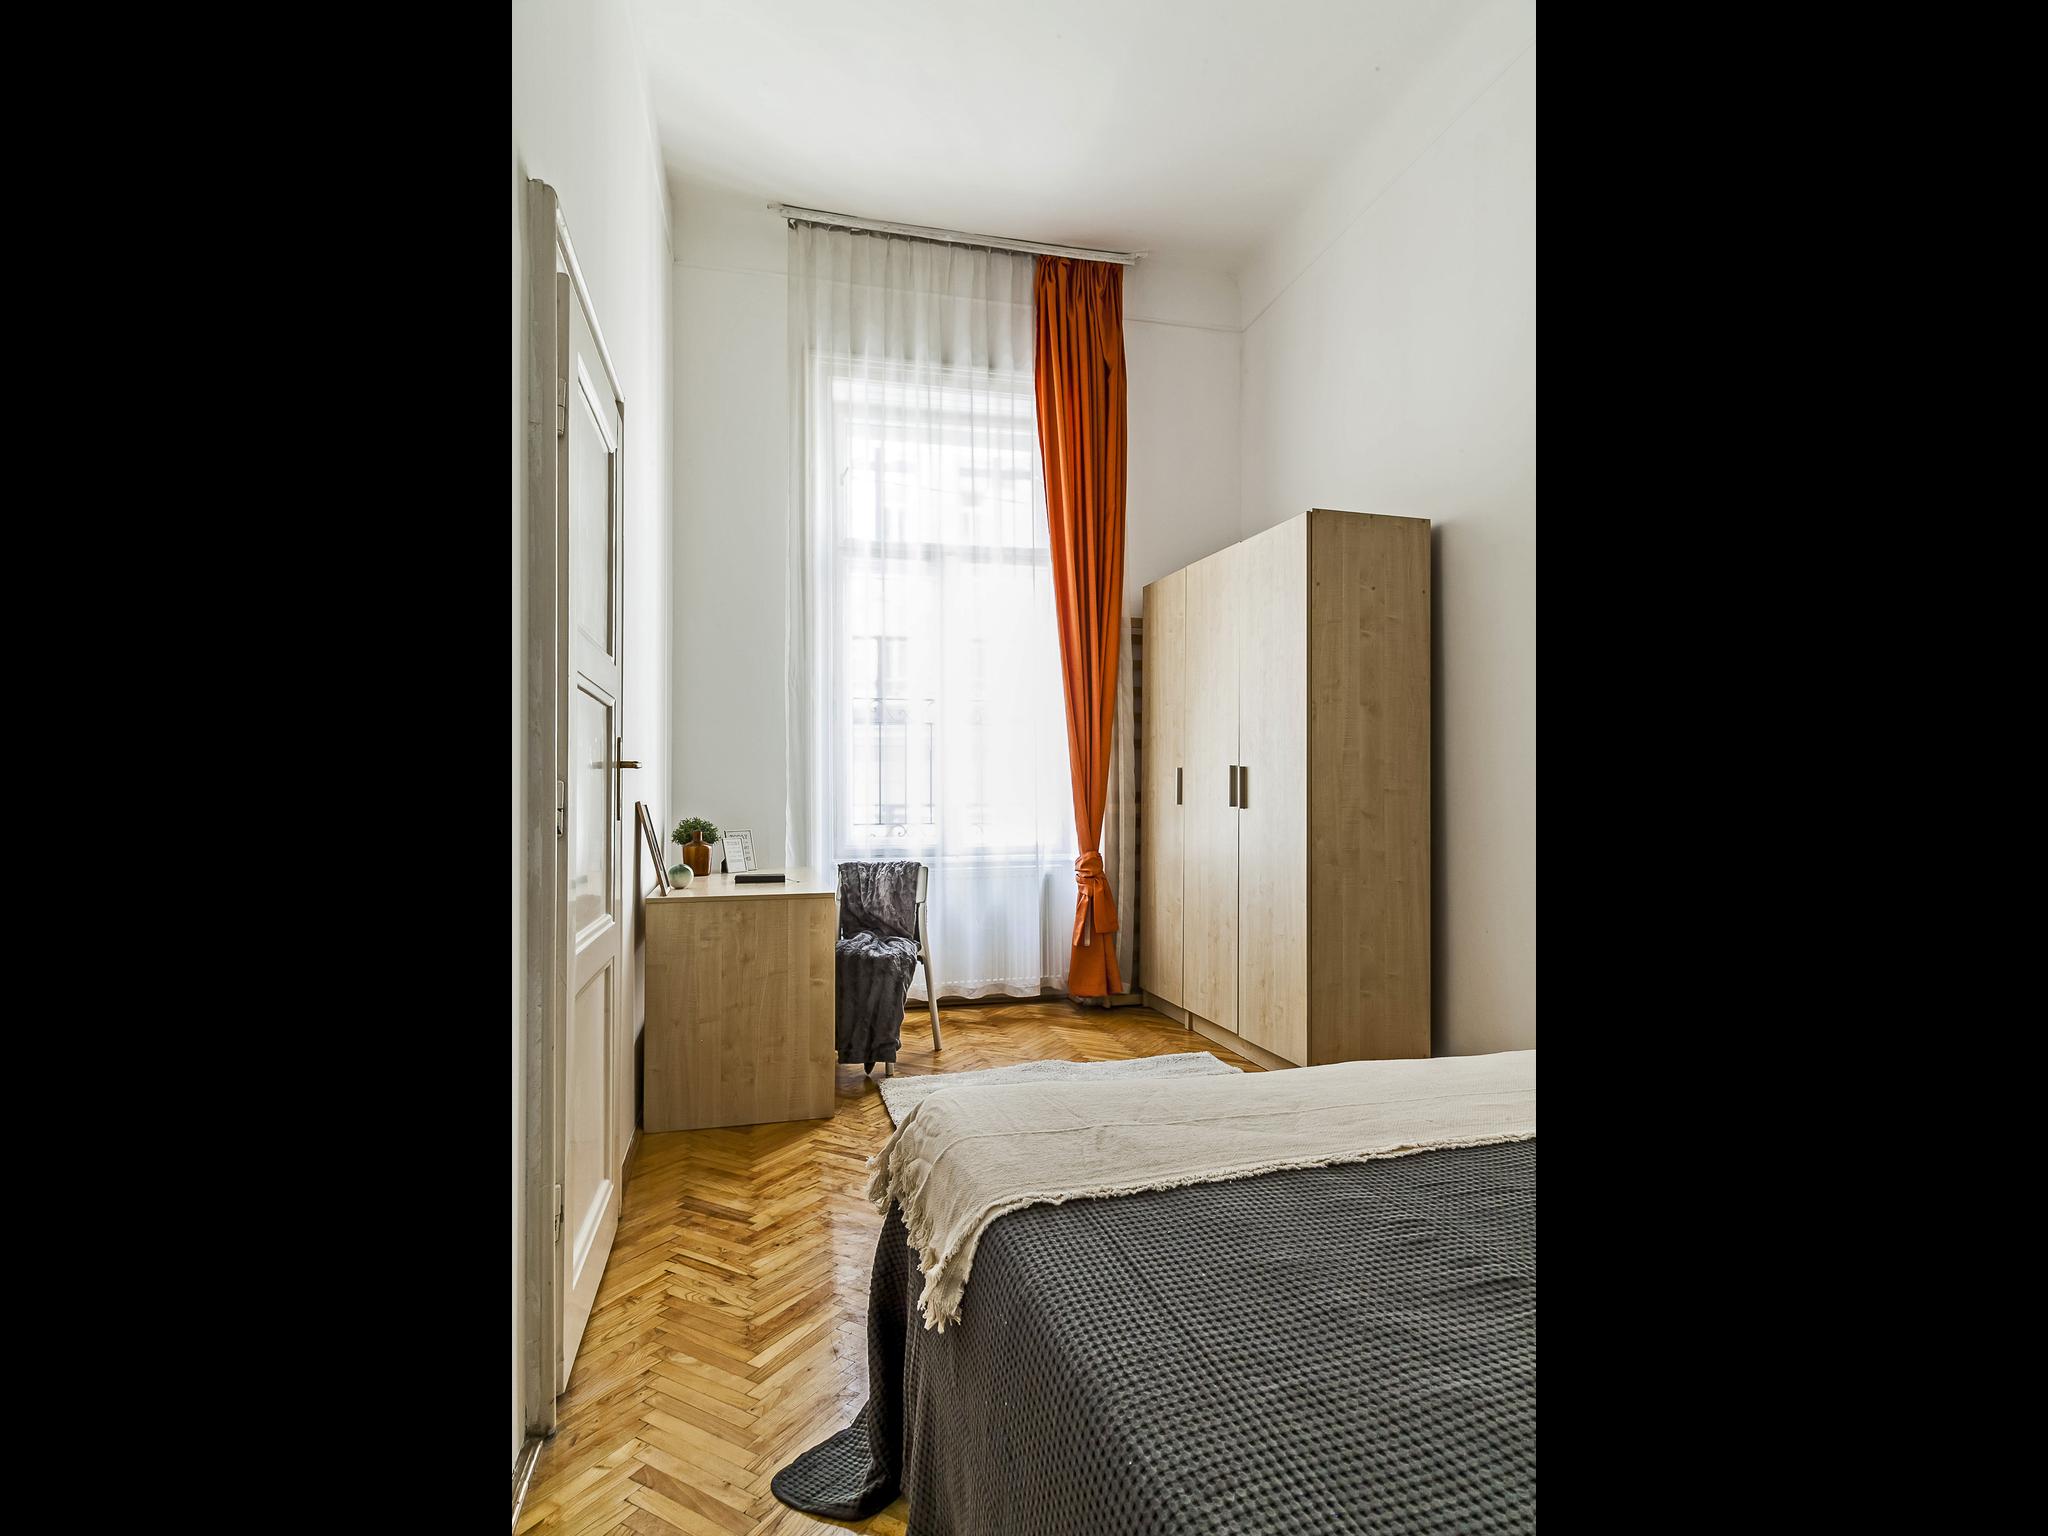 Nagymez - 4 bedroom flat in Budapest